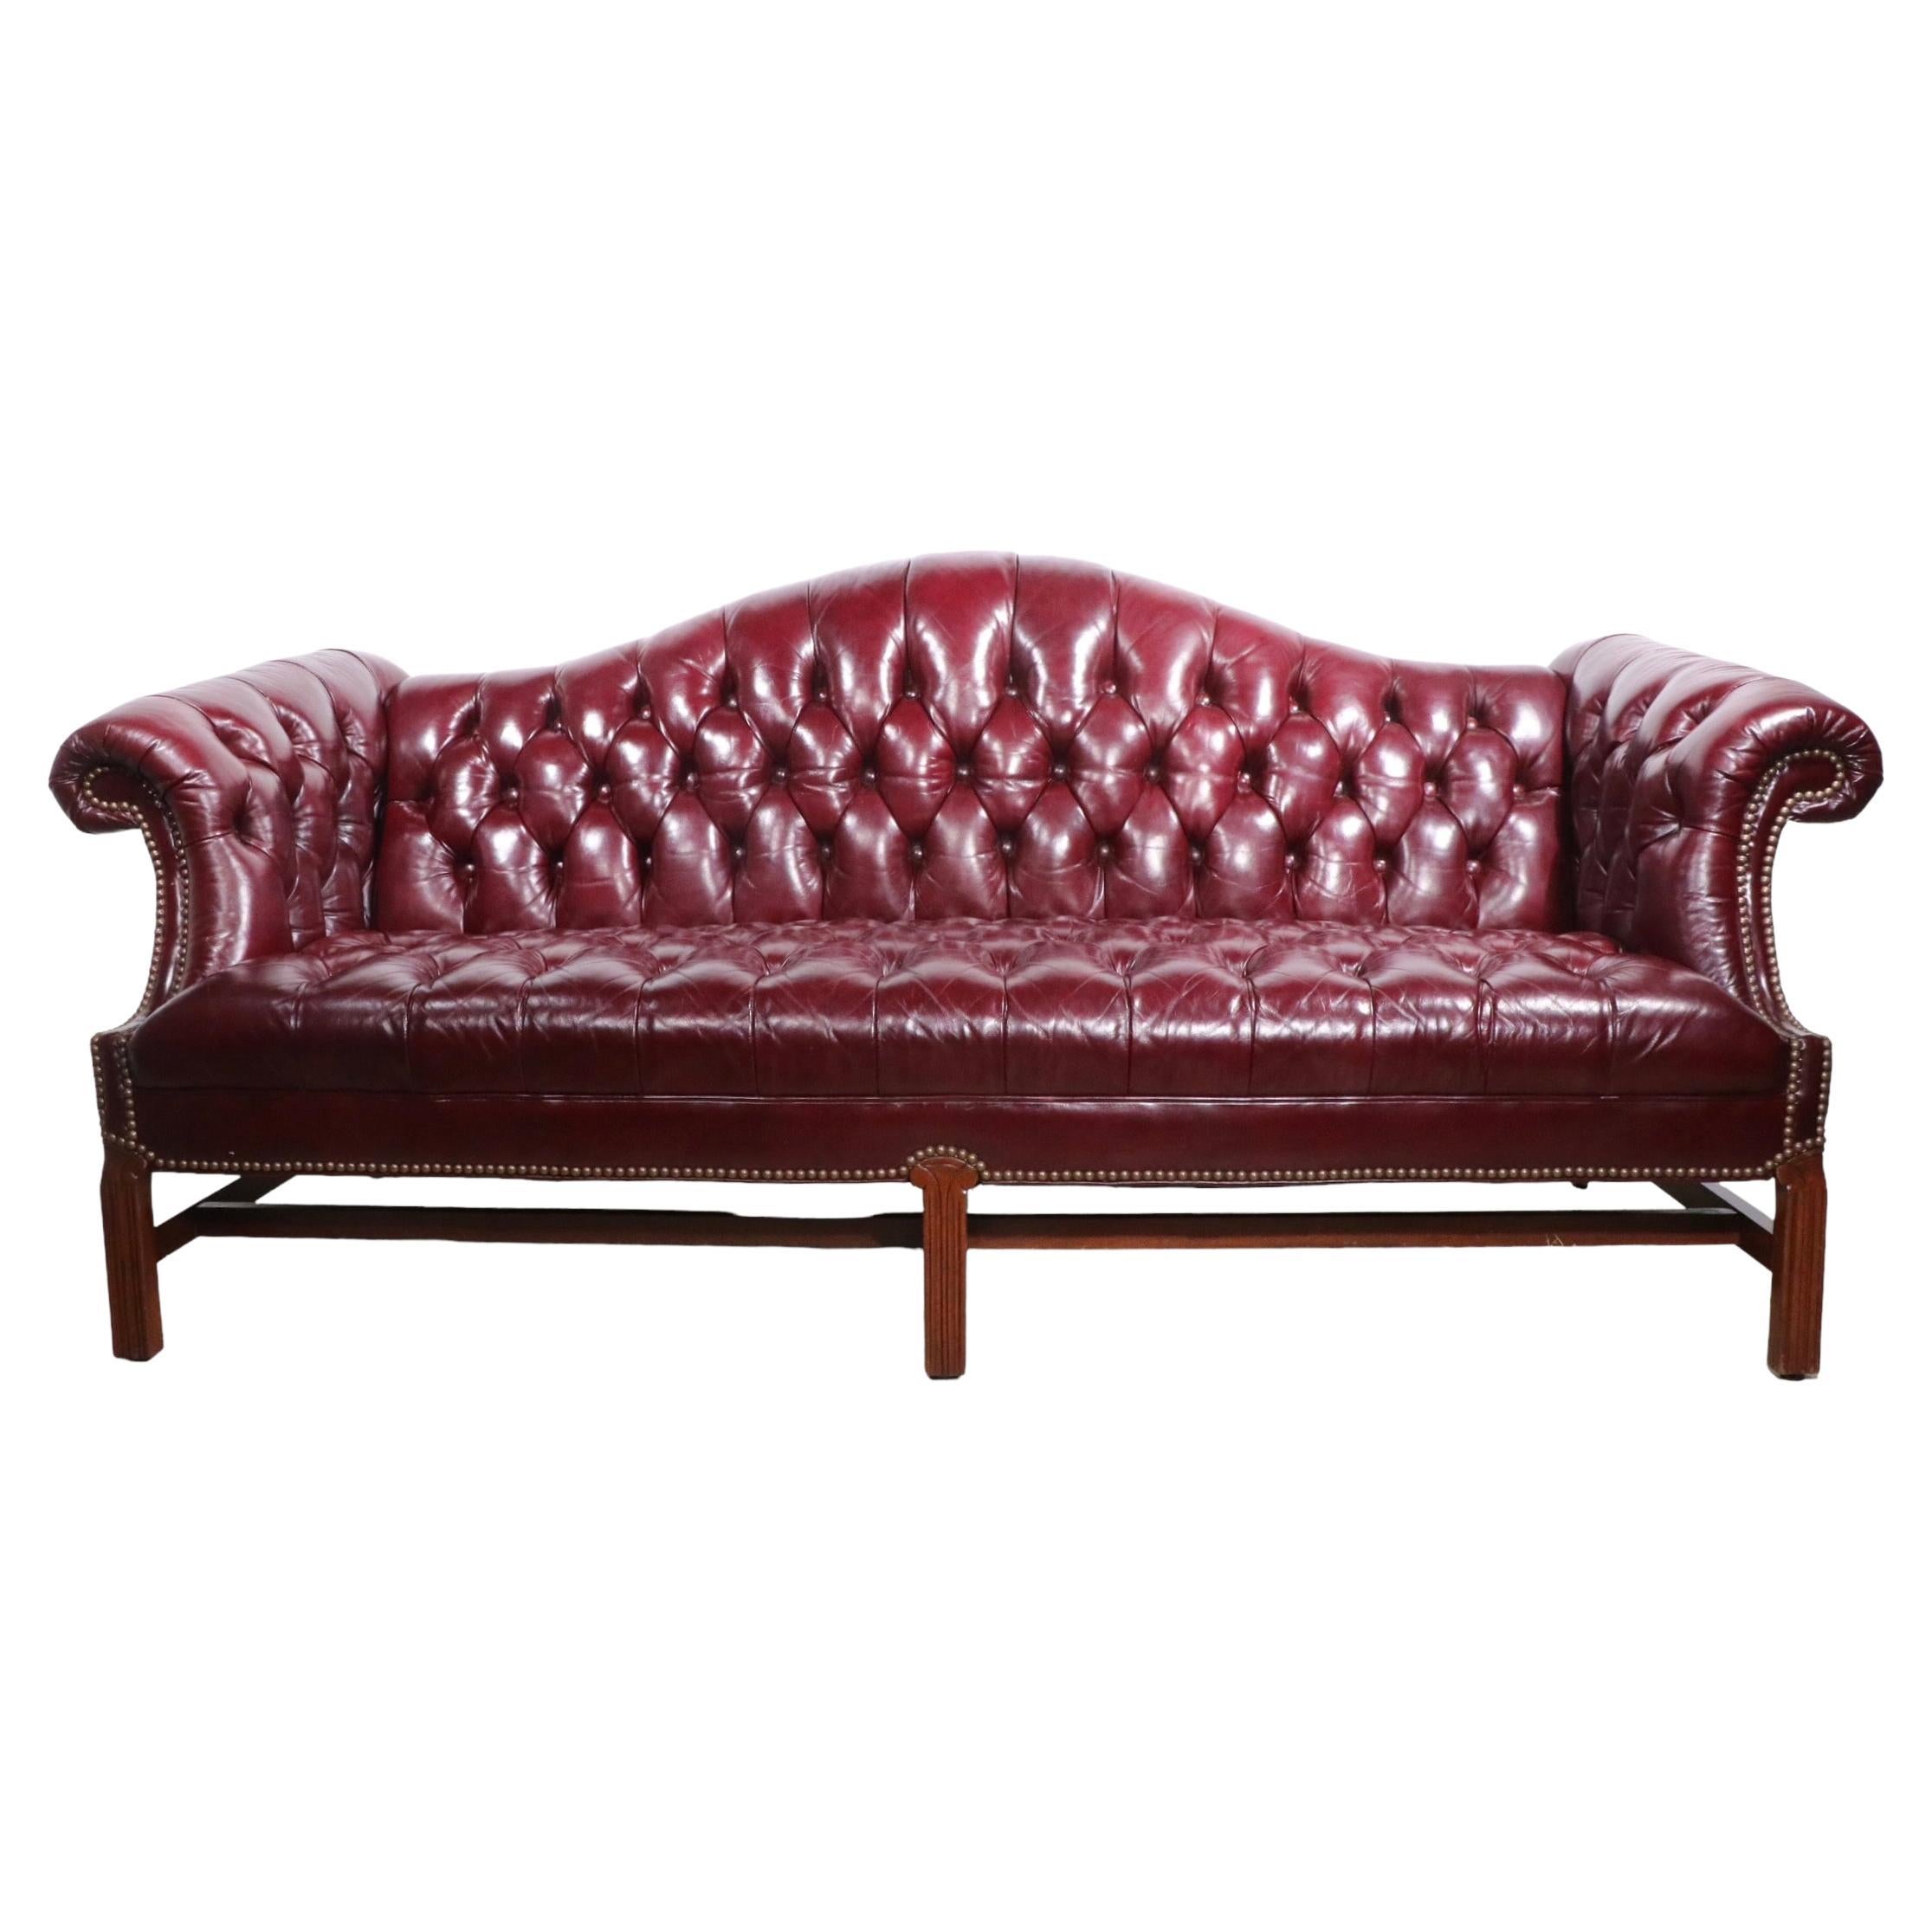  Tufted Burgundy  Leather Chesterfield Sofa c 1950/1960's For Sale